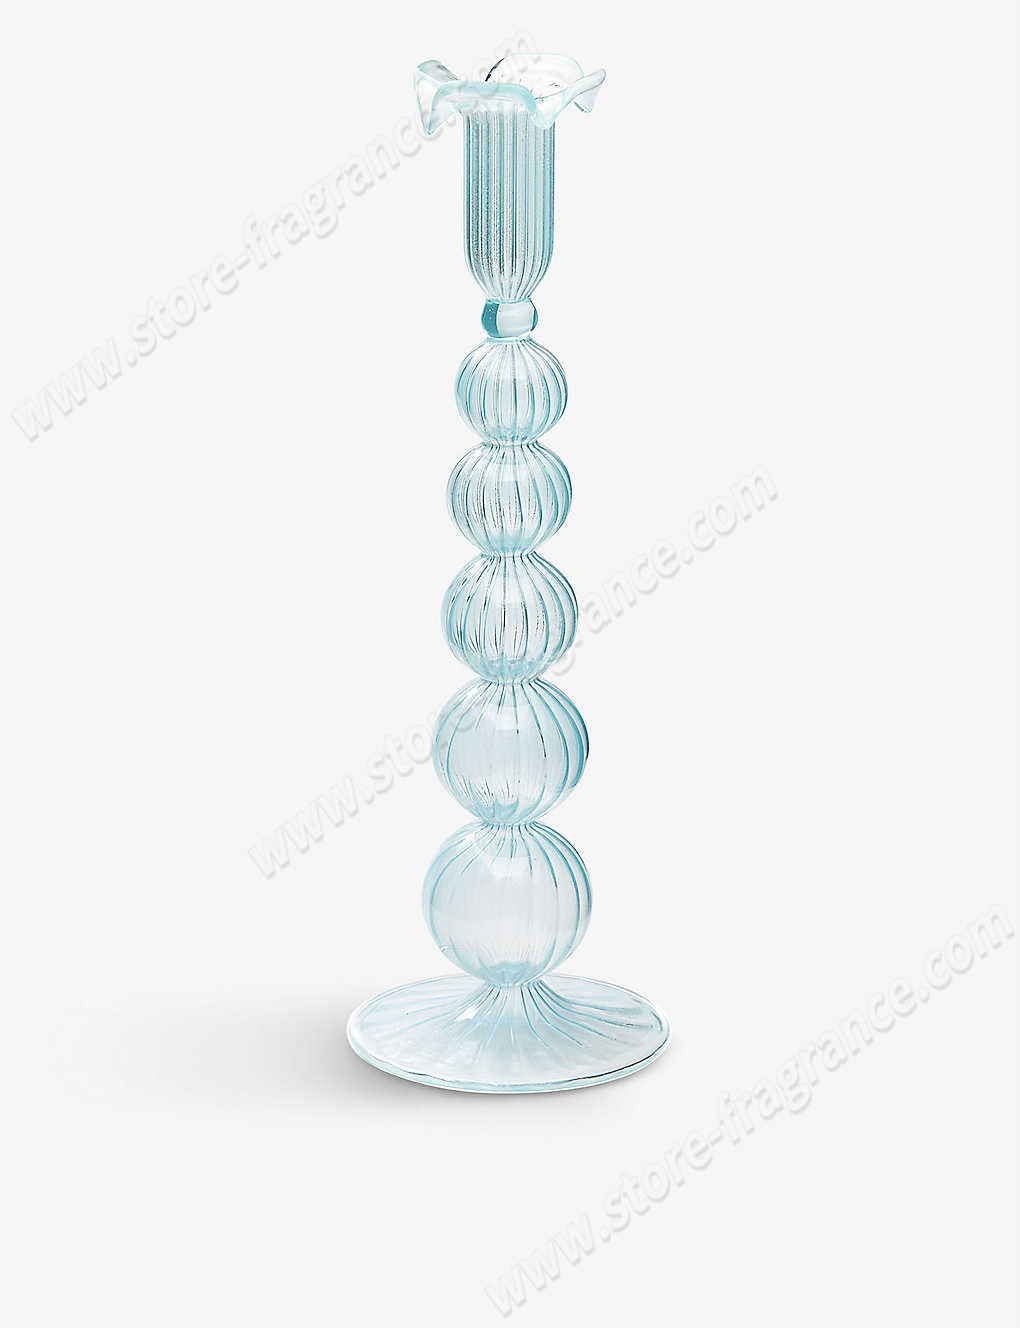 ANNA + NINA/Cloudy glass candle holder 29cm ✿ Discount Store - ANNA + NINA/Cloudy glass candle holder 29cm ✿ Discount Store